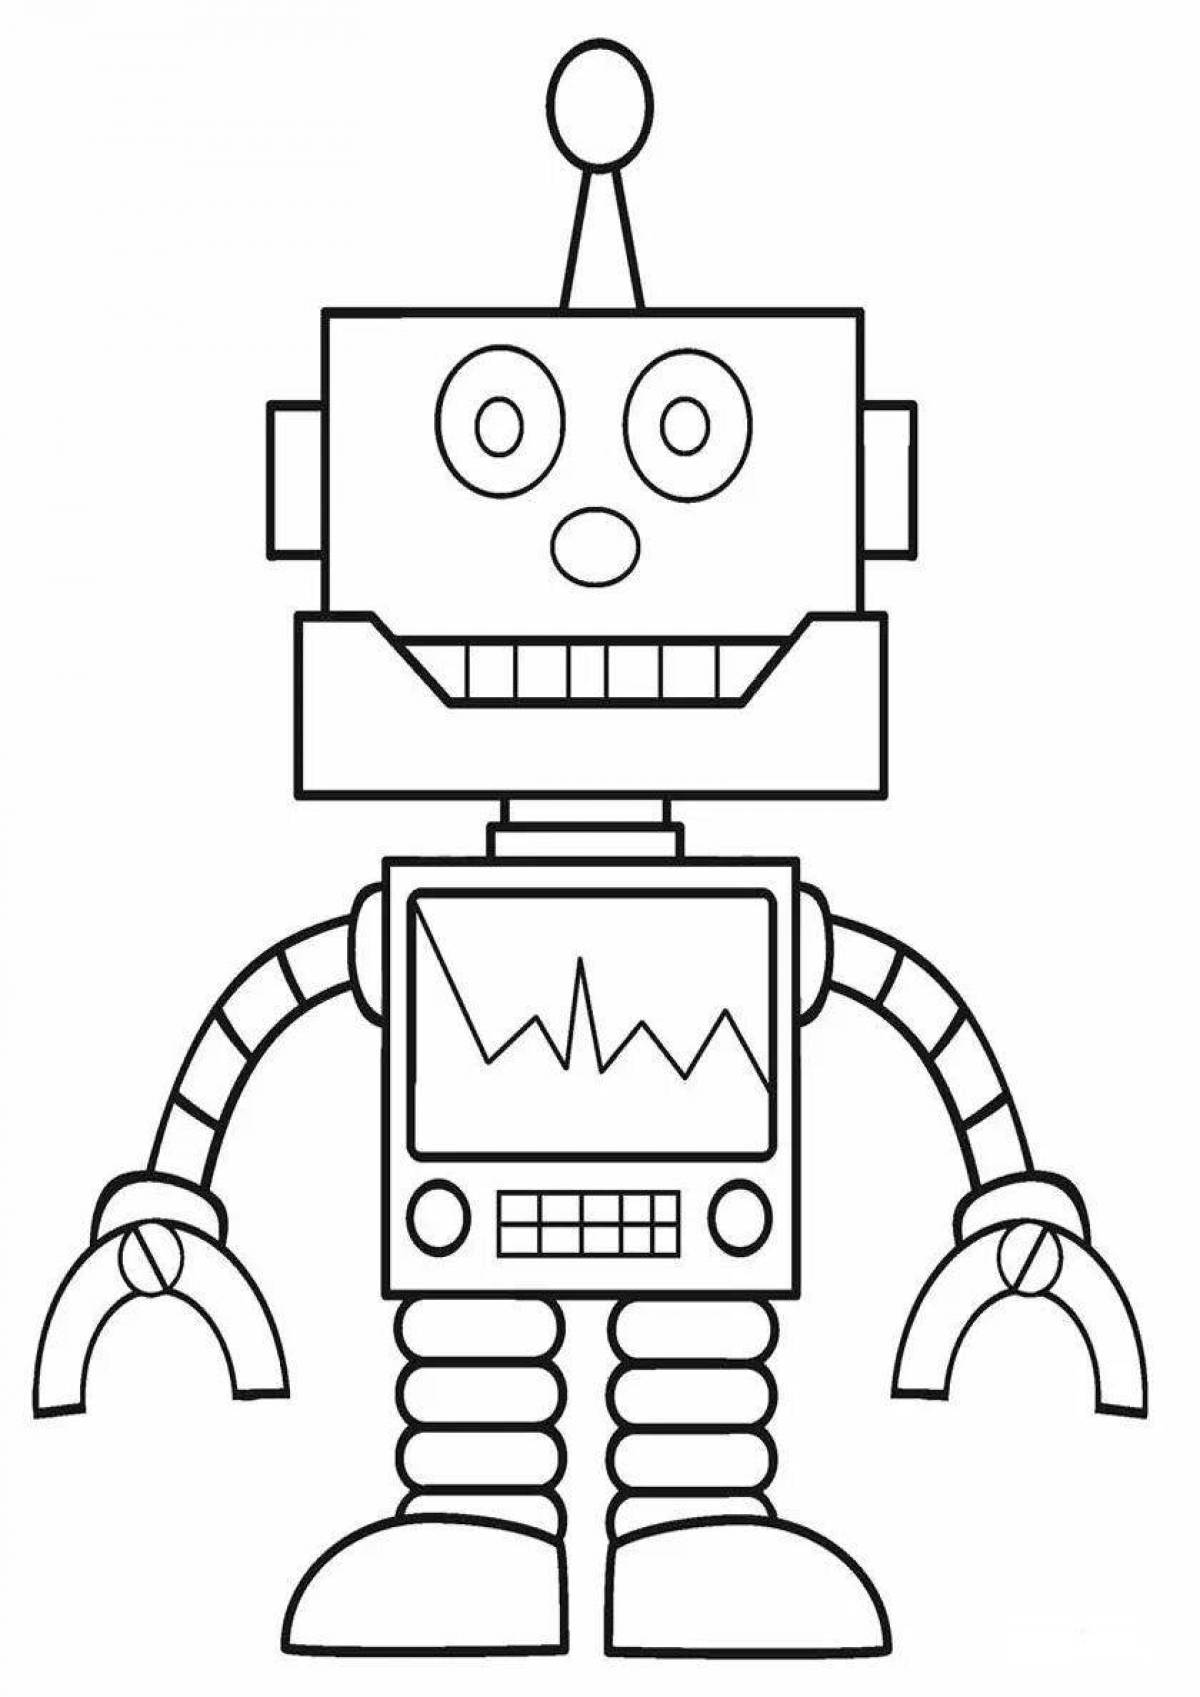 Coloring robots for children 7 years old